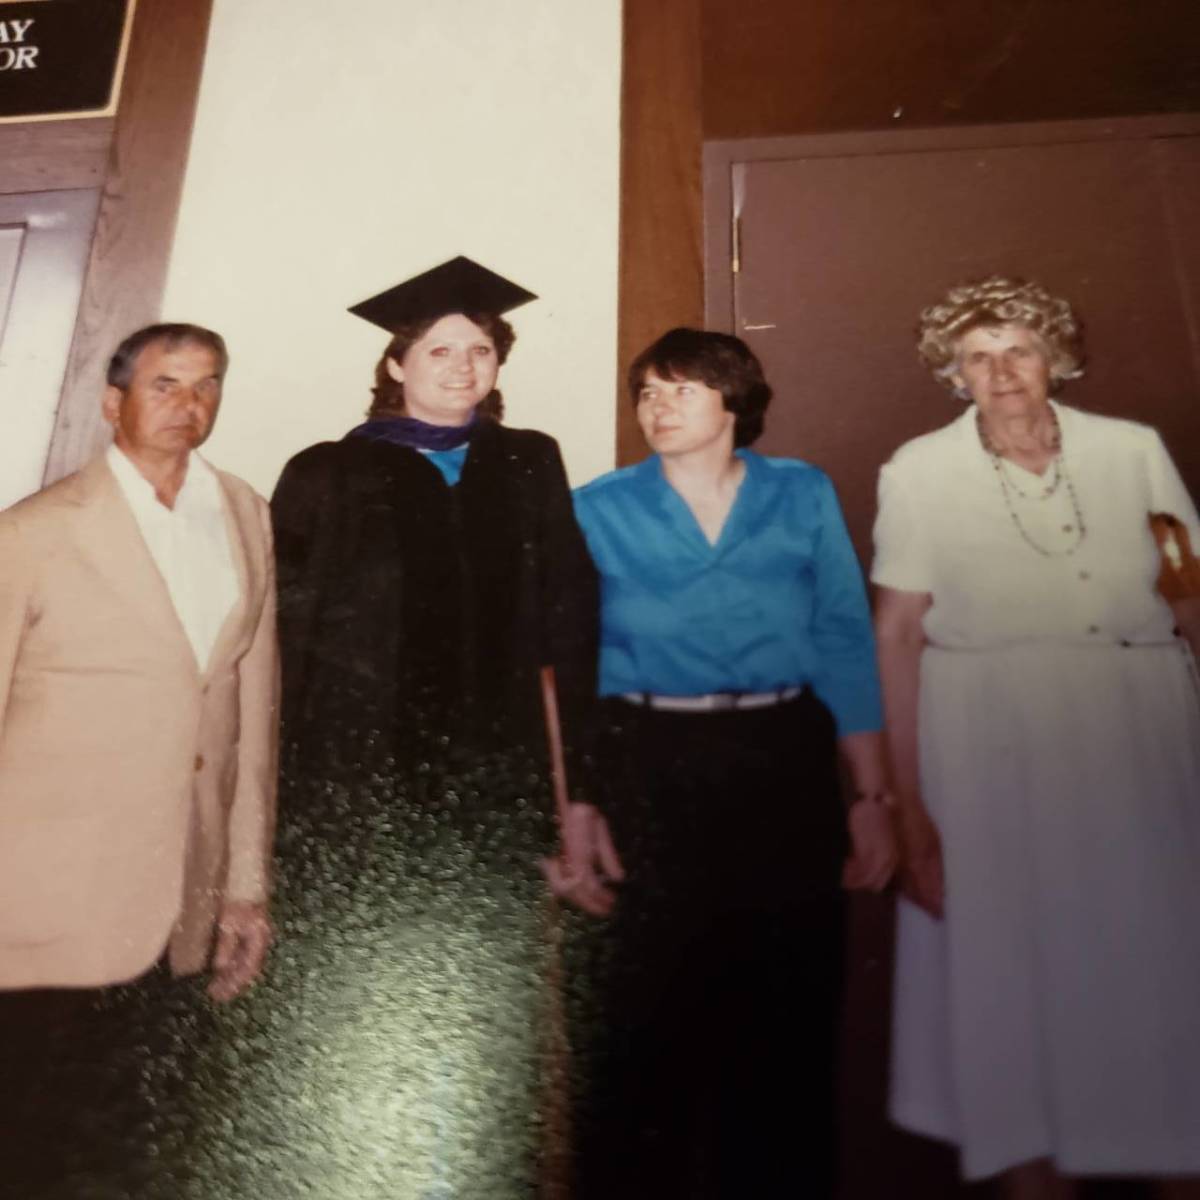 From left to right:  dad, Connie, Patty, and mom